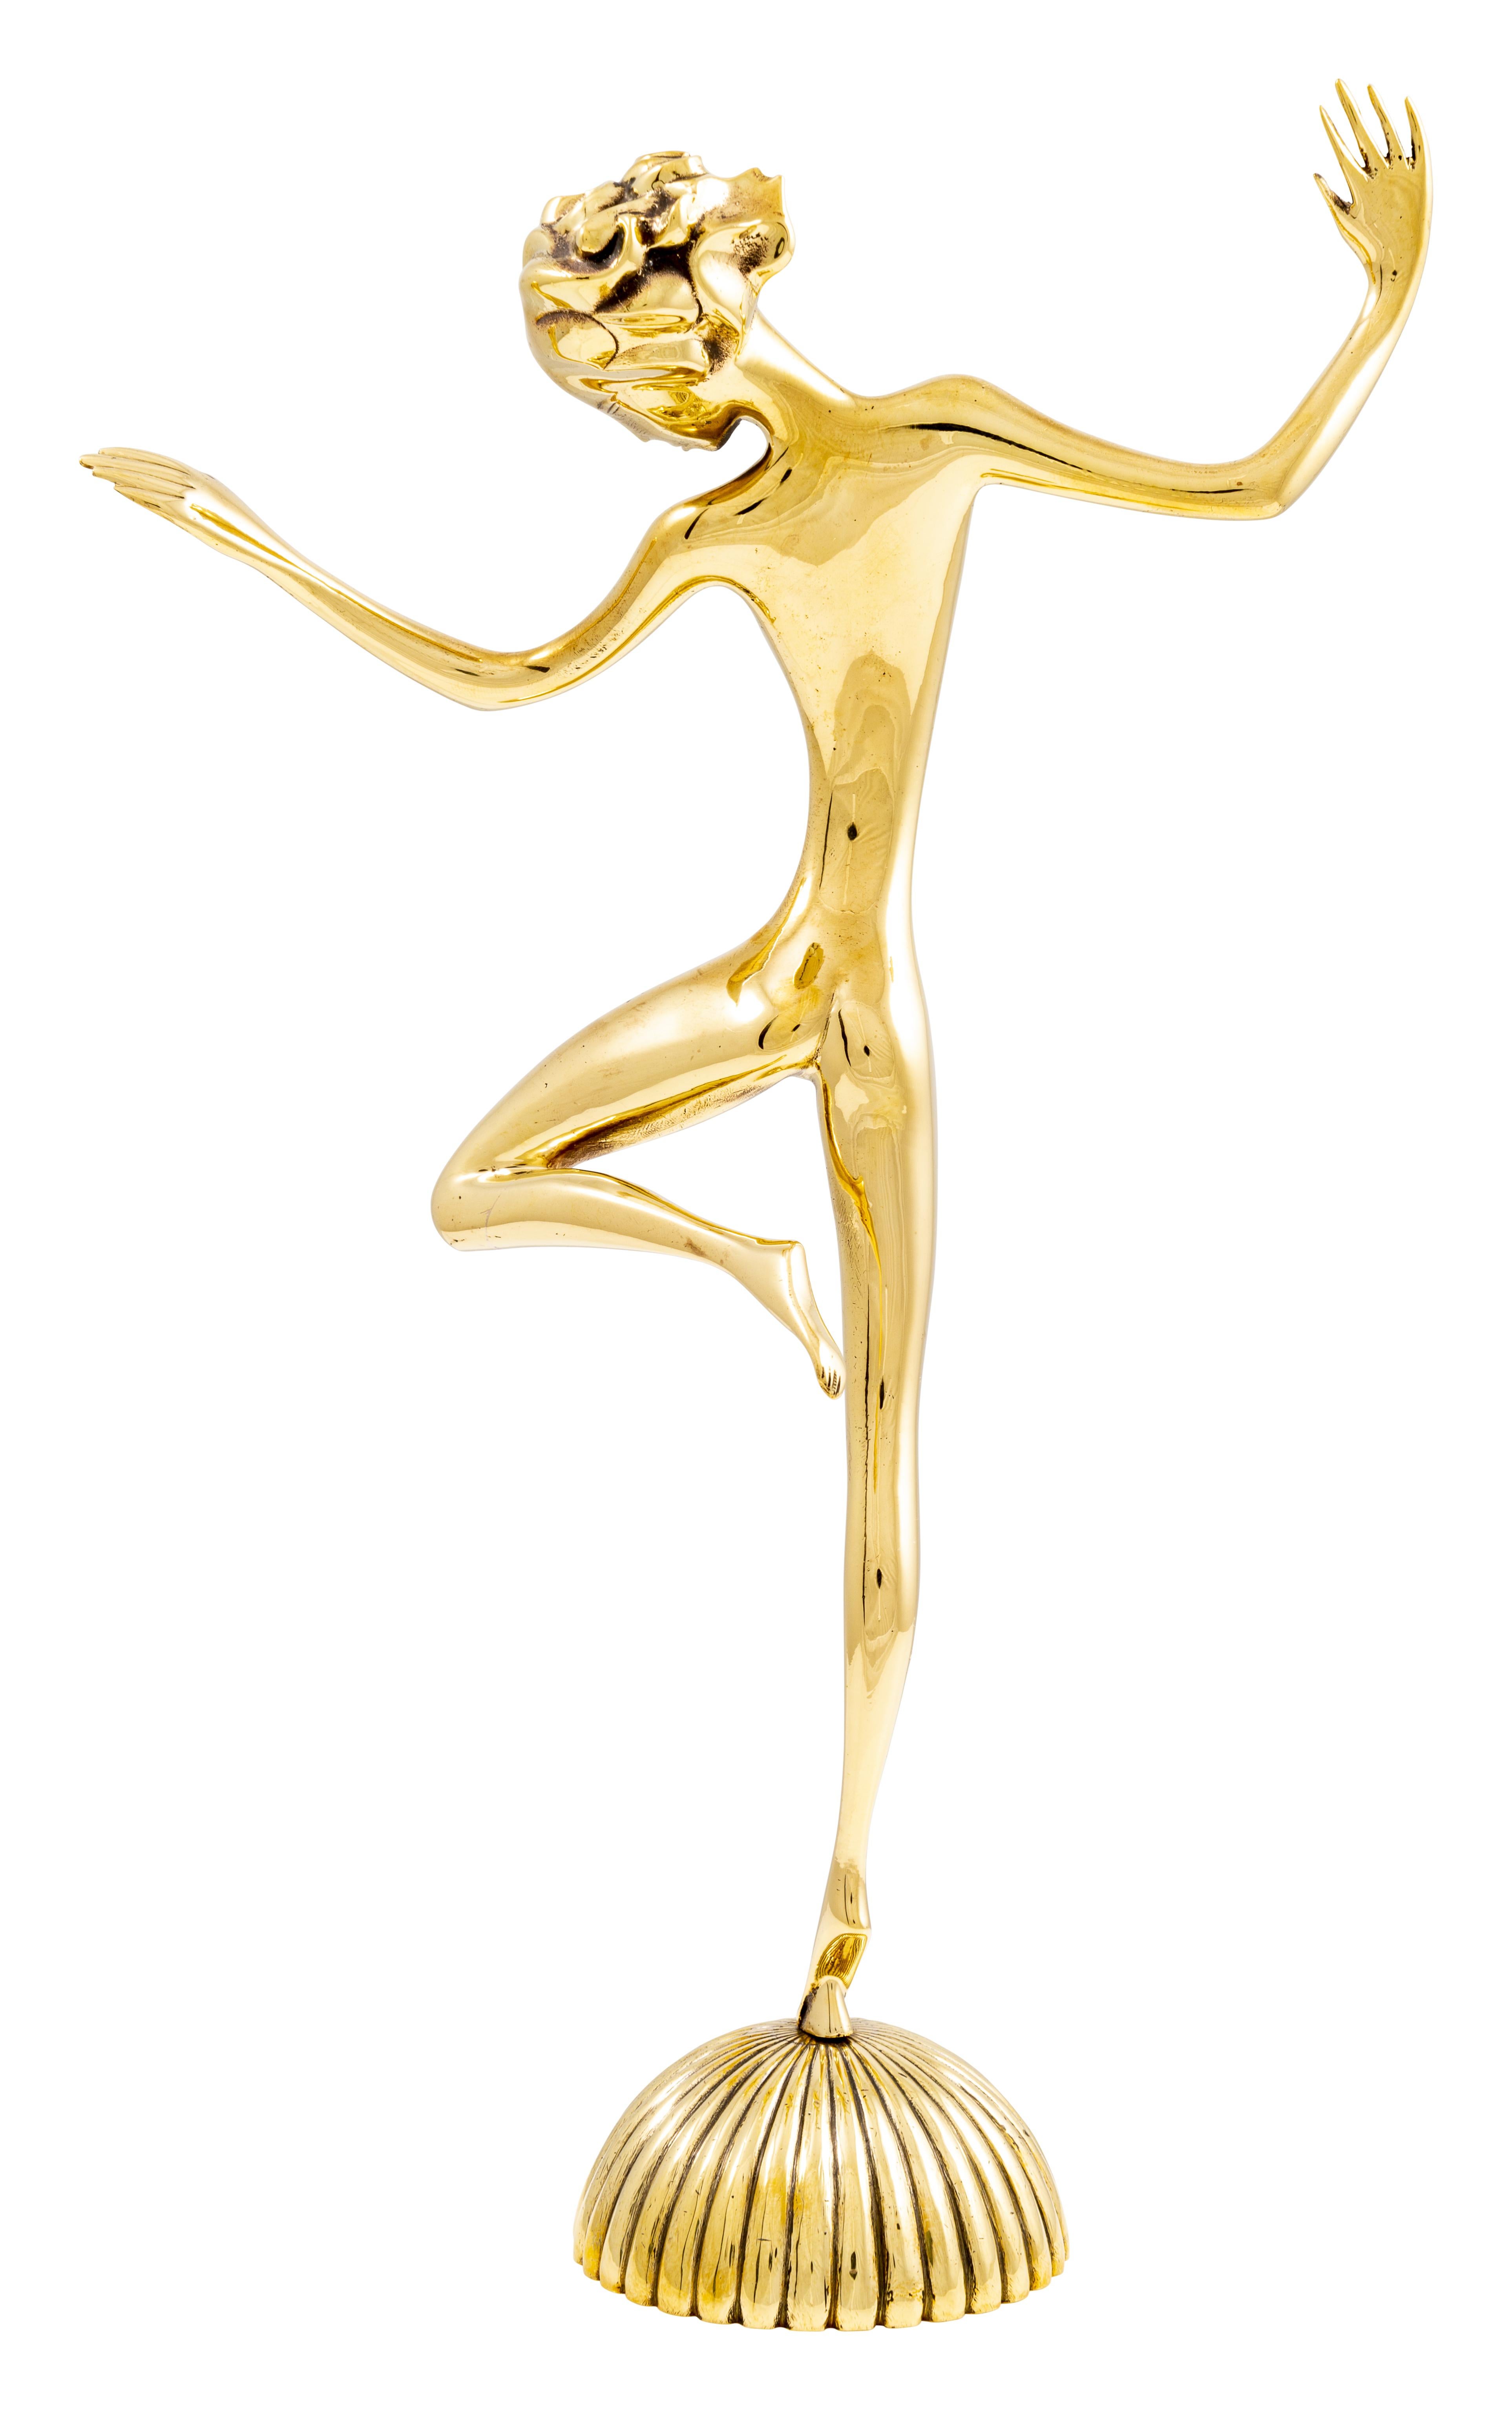 Art Deco female nude dancer brass Werkstatte Hagenauer Vienna Austria circa 1930

Female depictions played a crucial role in the oeuvre of both Hagenauer brothers since the very beginning of their careers. Throughout the years they created an